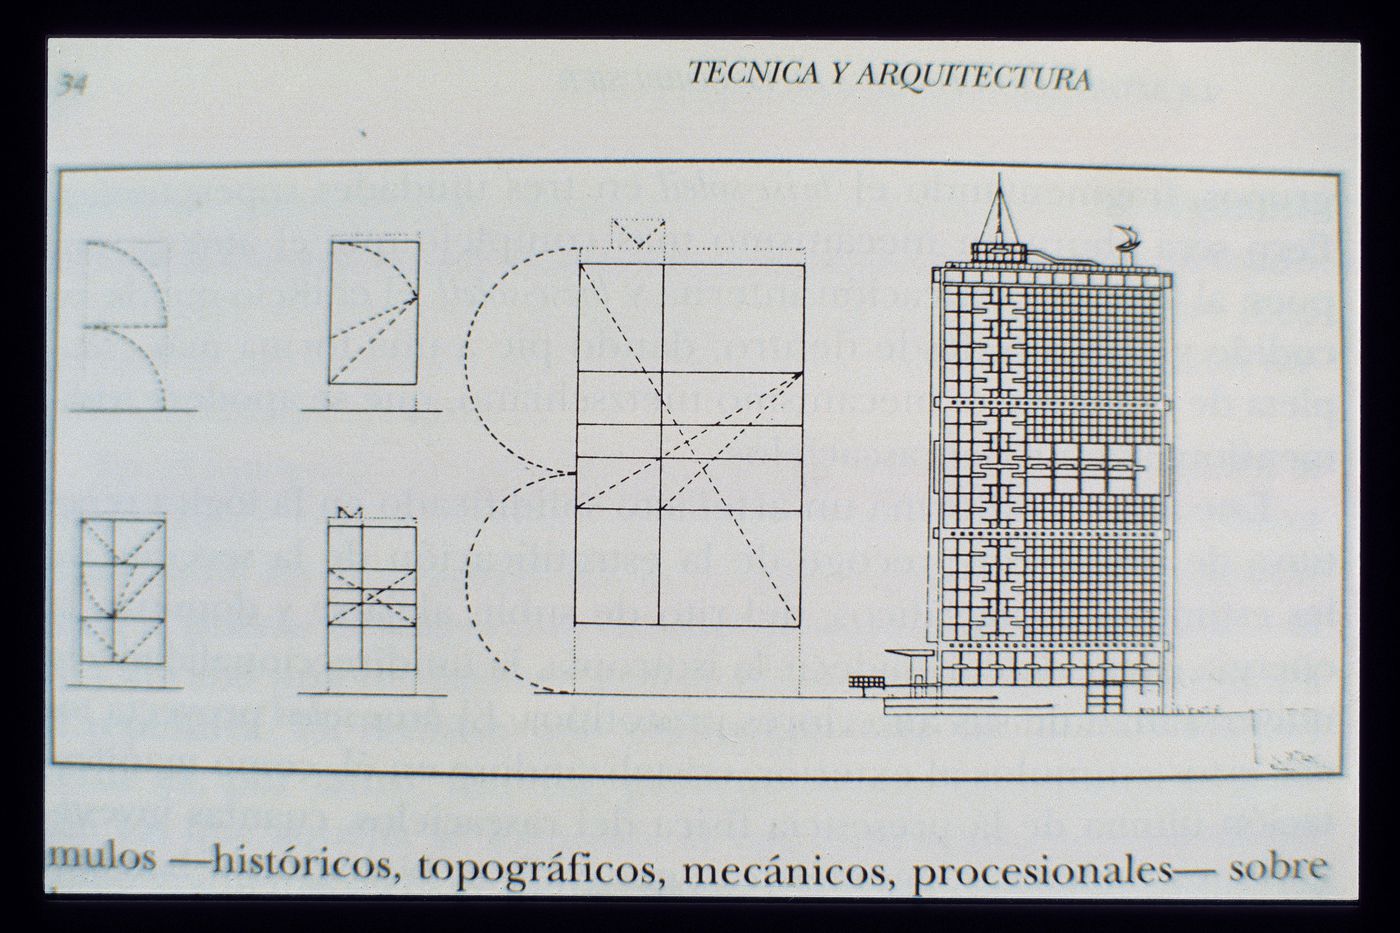 Slide of a drawing for Cartesian Skyscraper, Algiers, by Le Corbusier